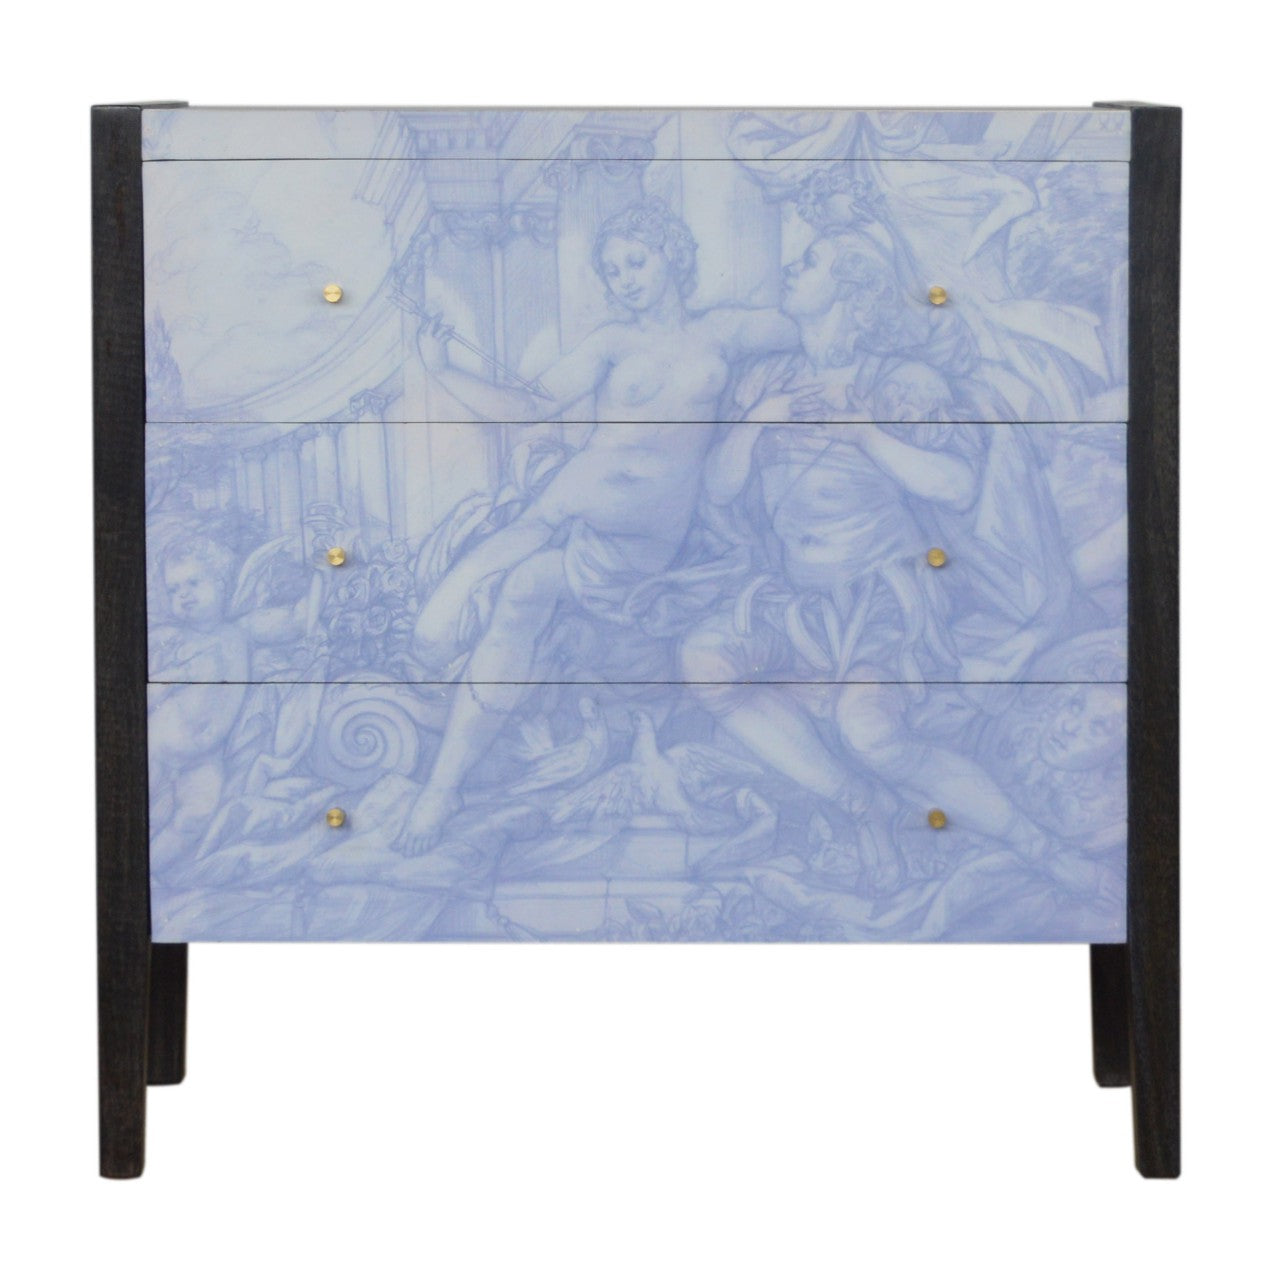 blue chest of drawers